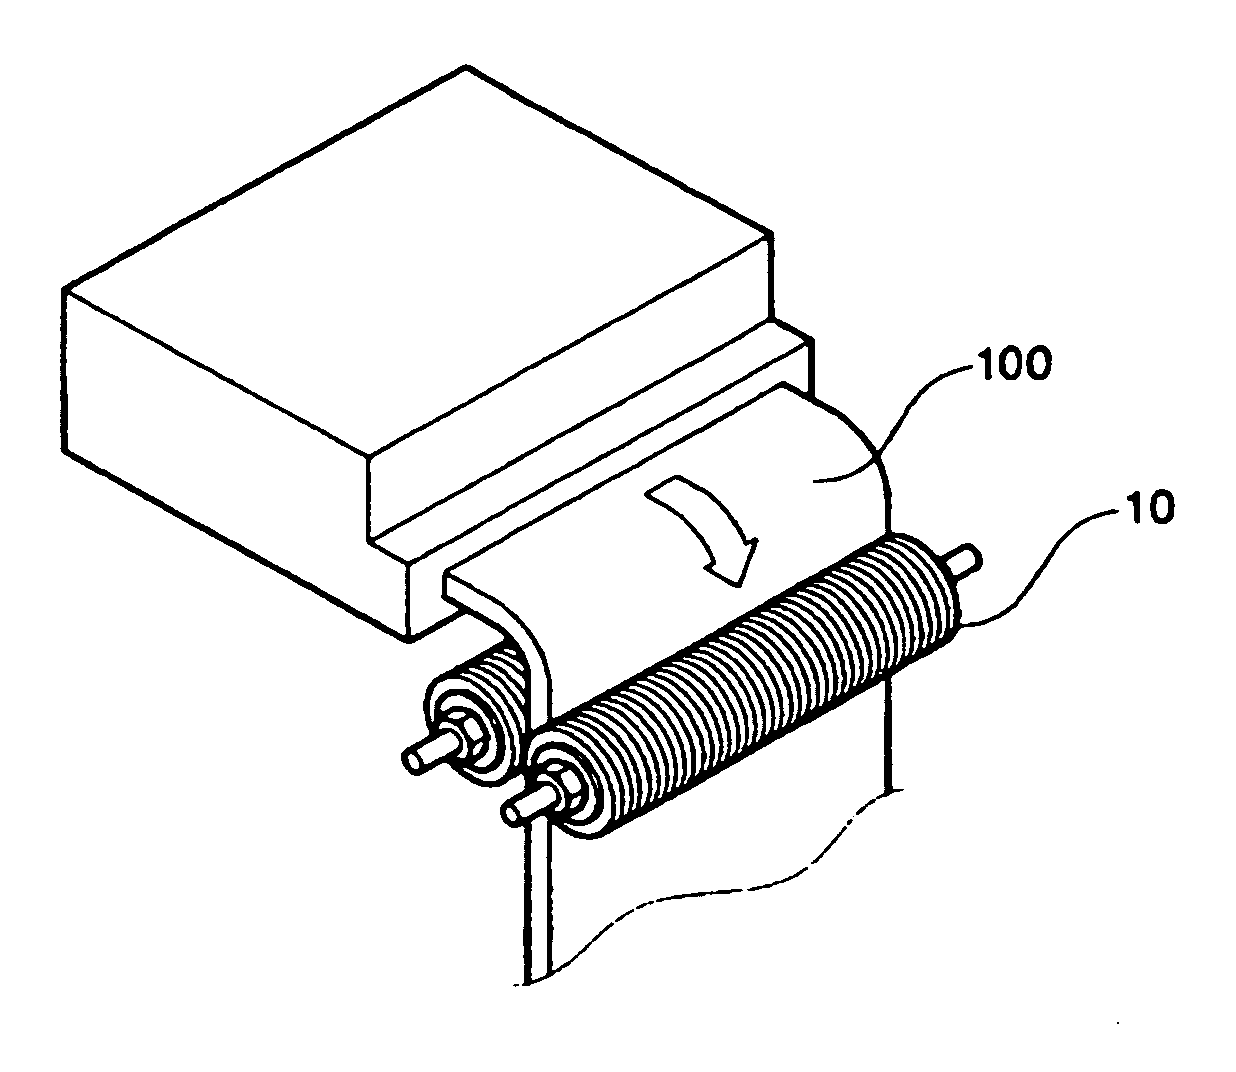 Disk roll and base material thereof